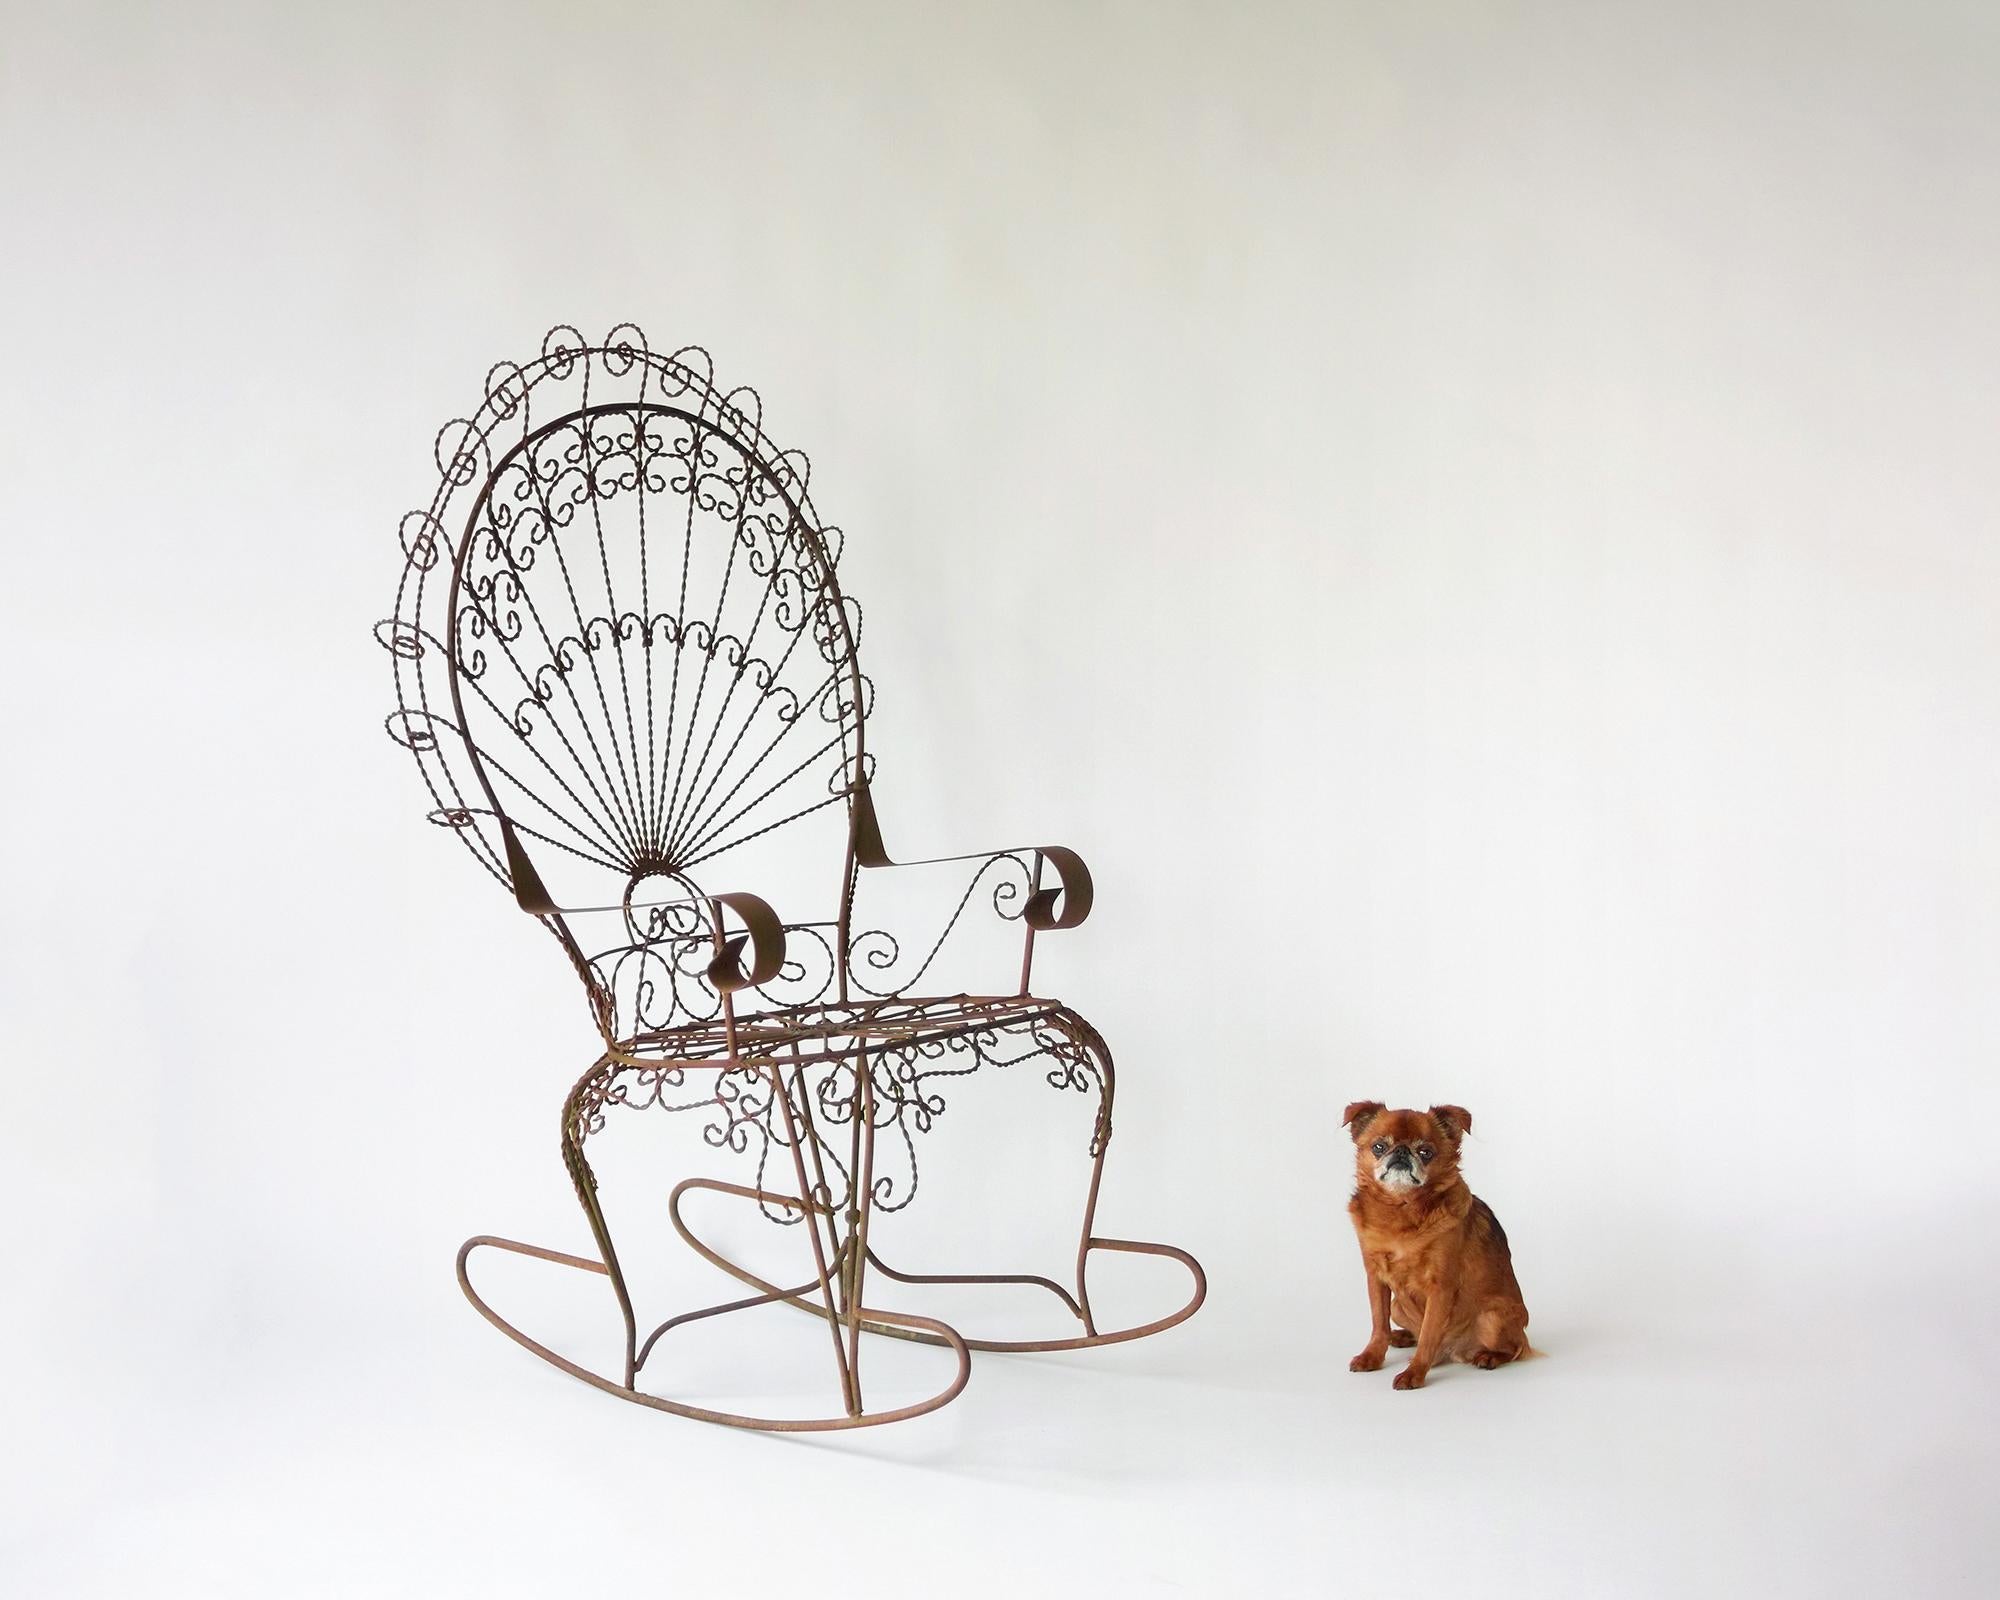 For your consideration is this all-original Peacock rocker by Salterini with a great aged patina, composed of twisted, curled, and welded wrought iron wire. A fun and dramatic place to sit, in this less common rocker variation of the Salterini